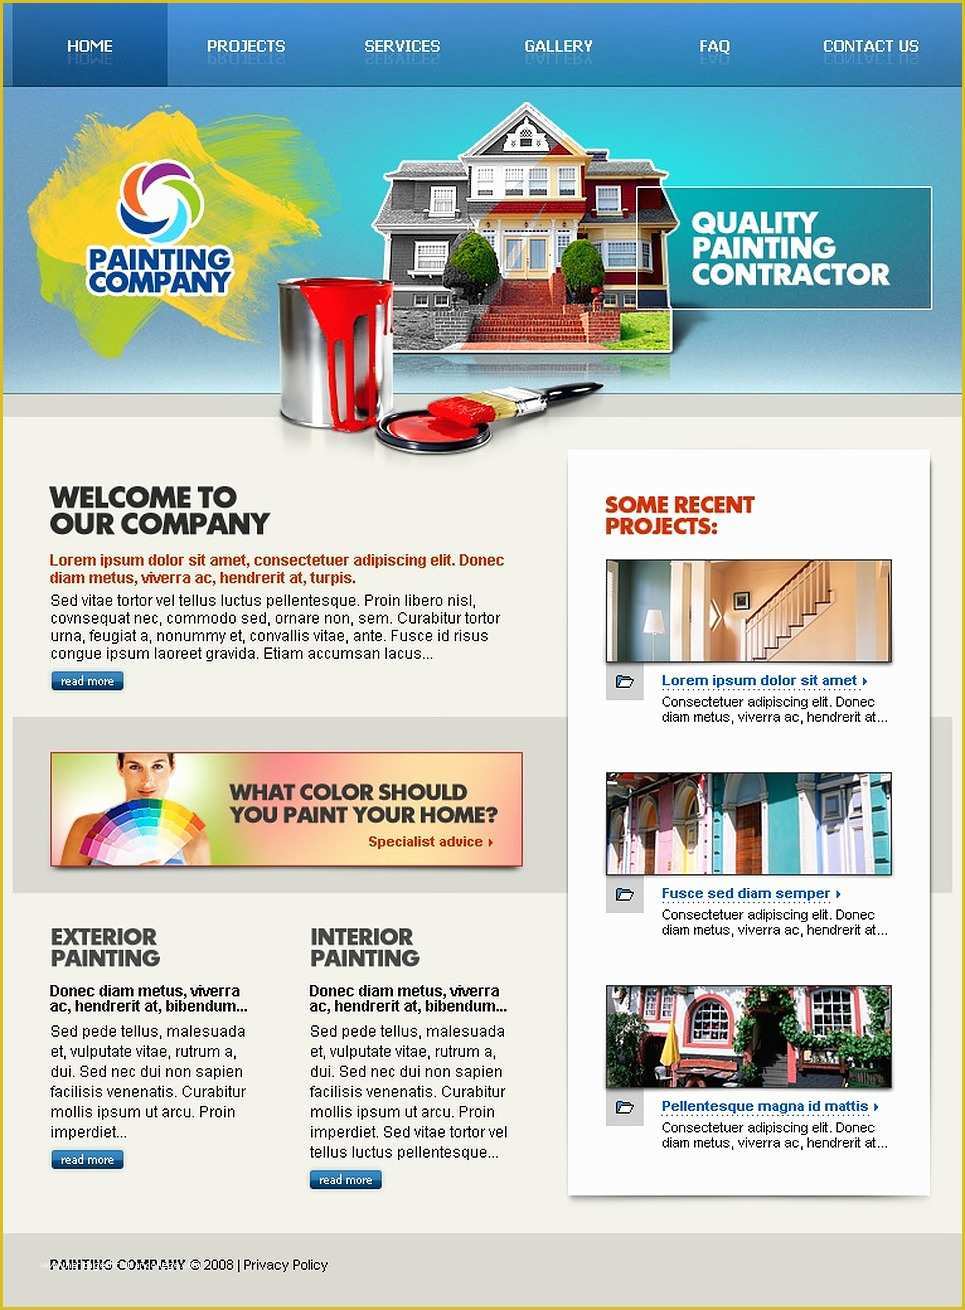 Painting Company Website Templates Free Download Of Painting Pany Website Template